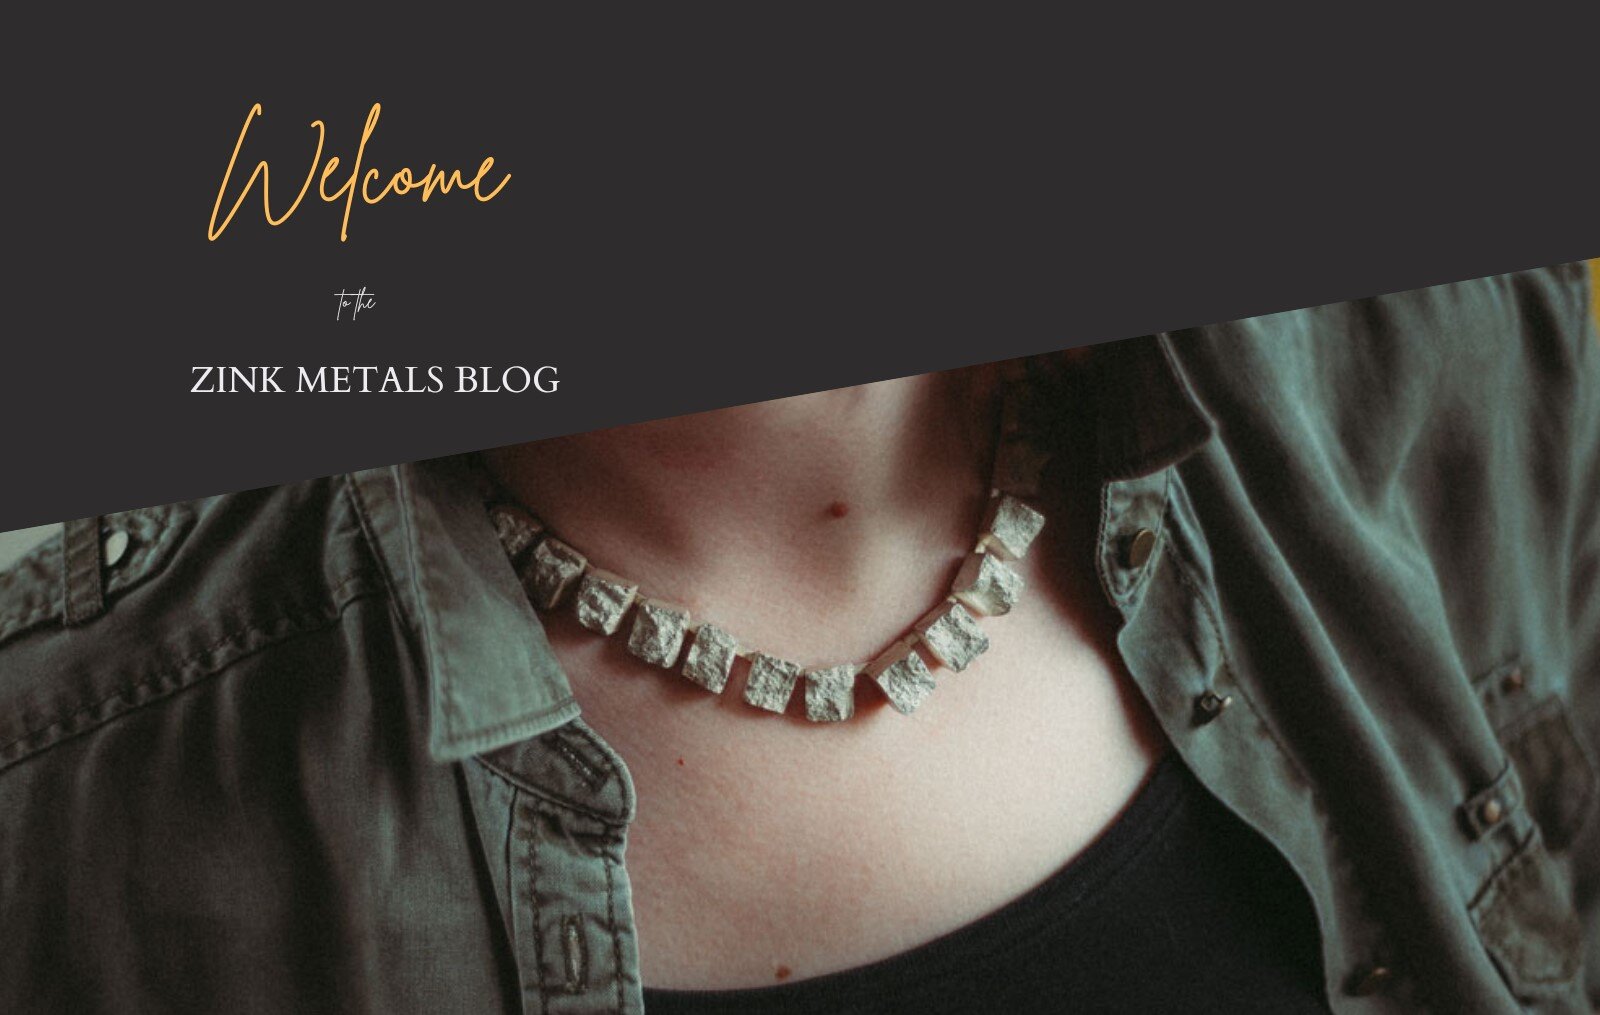 welcome to the Zink Metals blog featuring a broken silver necklace